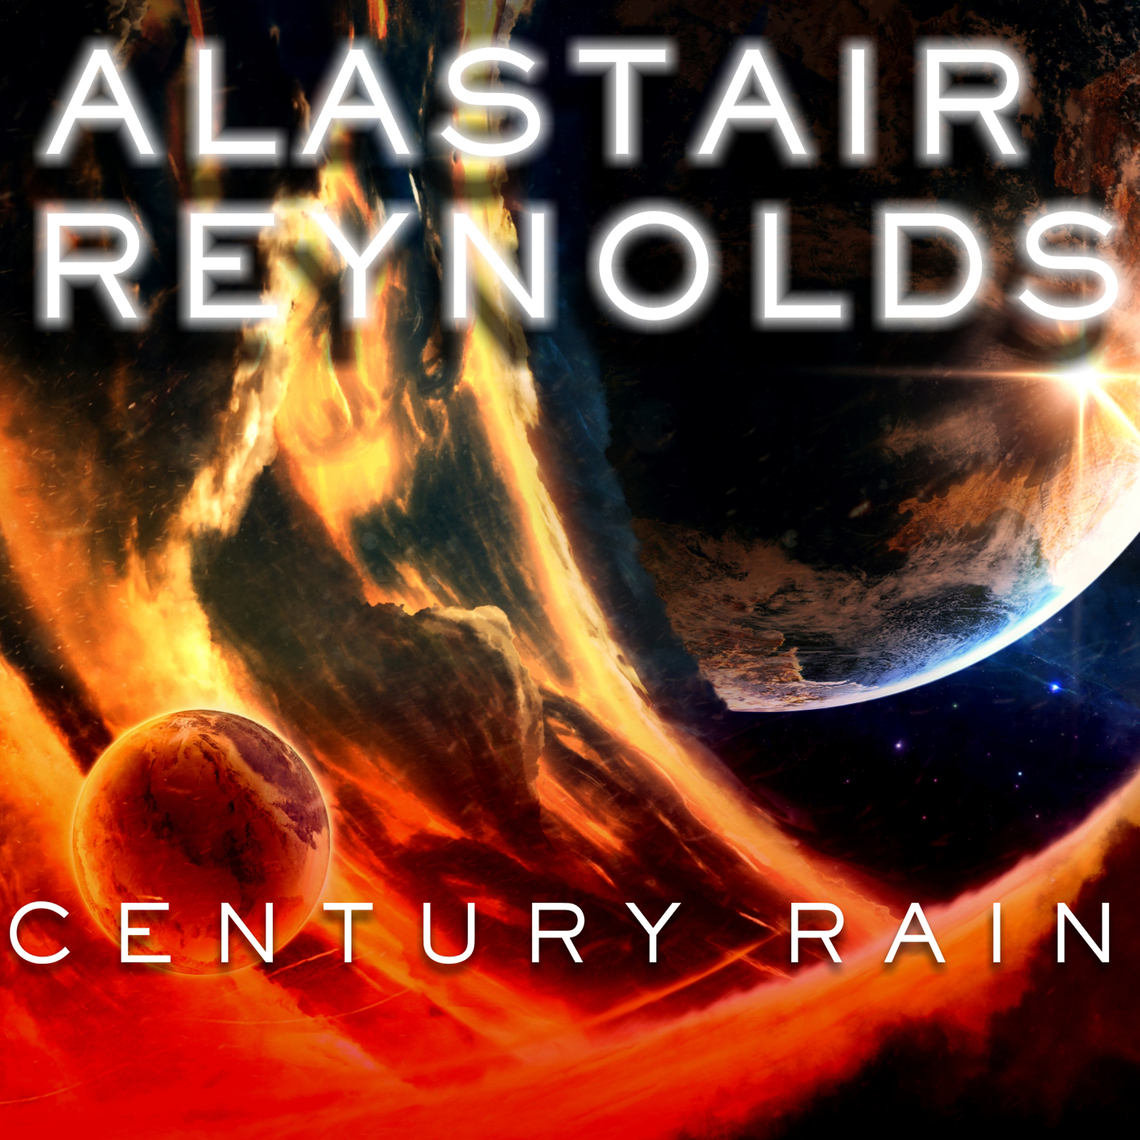 House of Suns by Alastair Reynolds - Audiobook